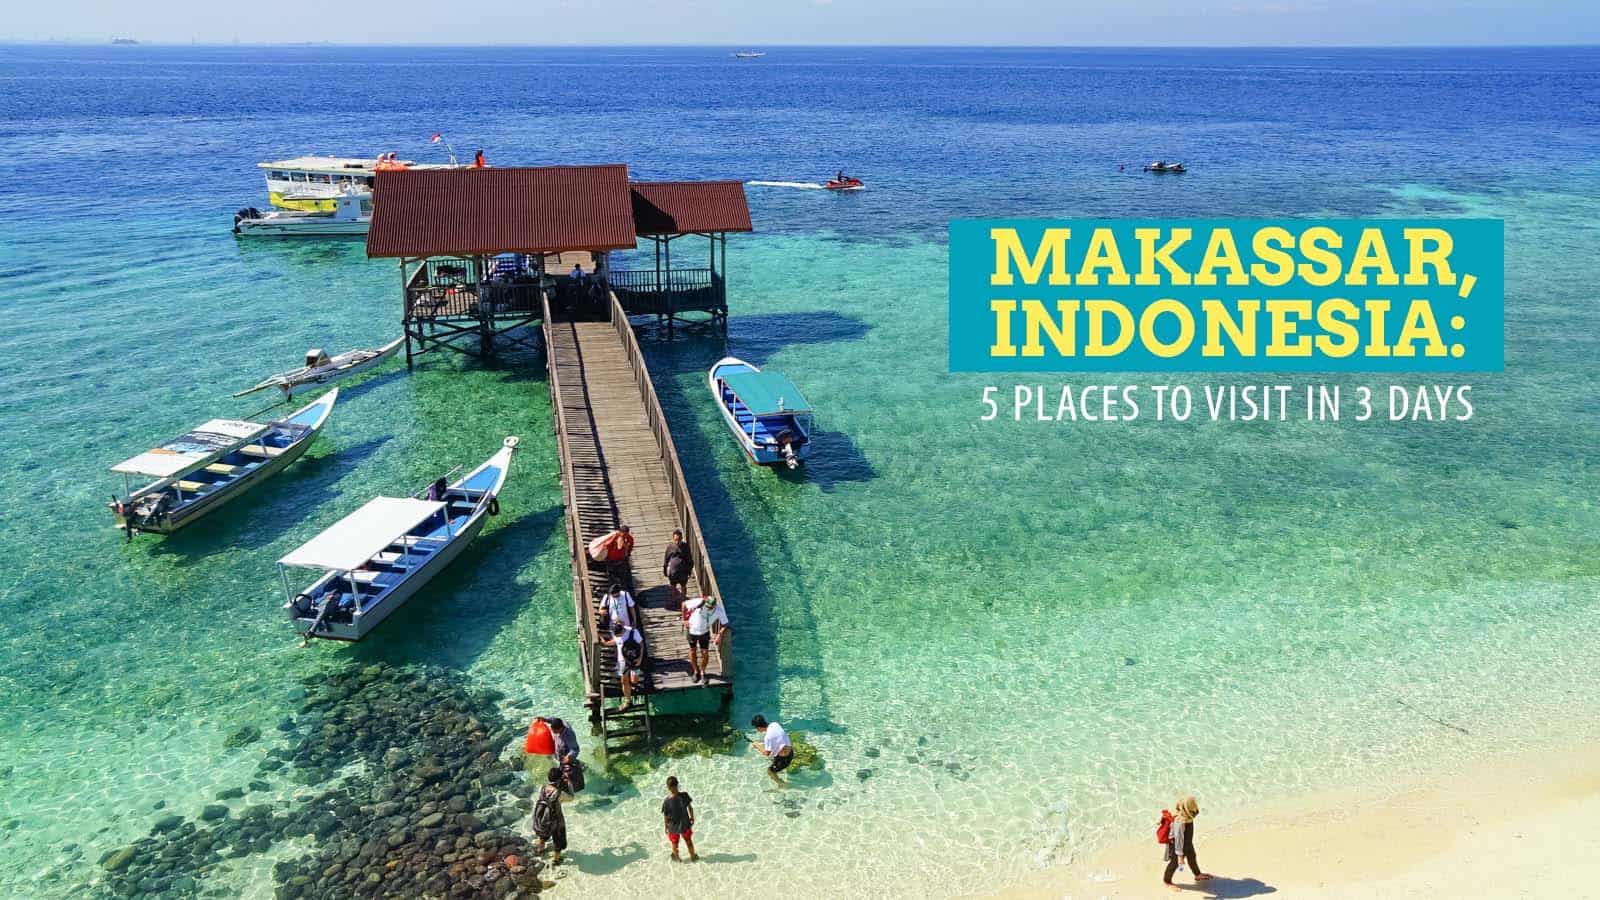 Makassar, Indonesia: 5 Places to Visit in 3 Days